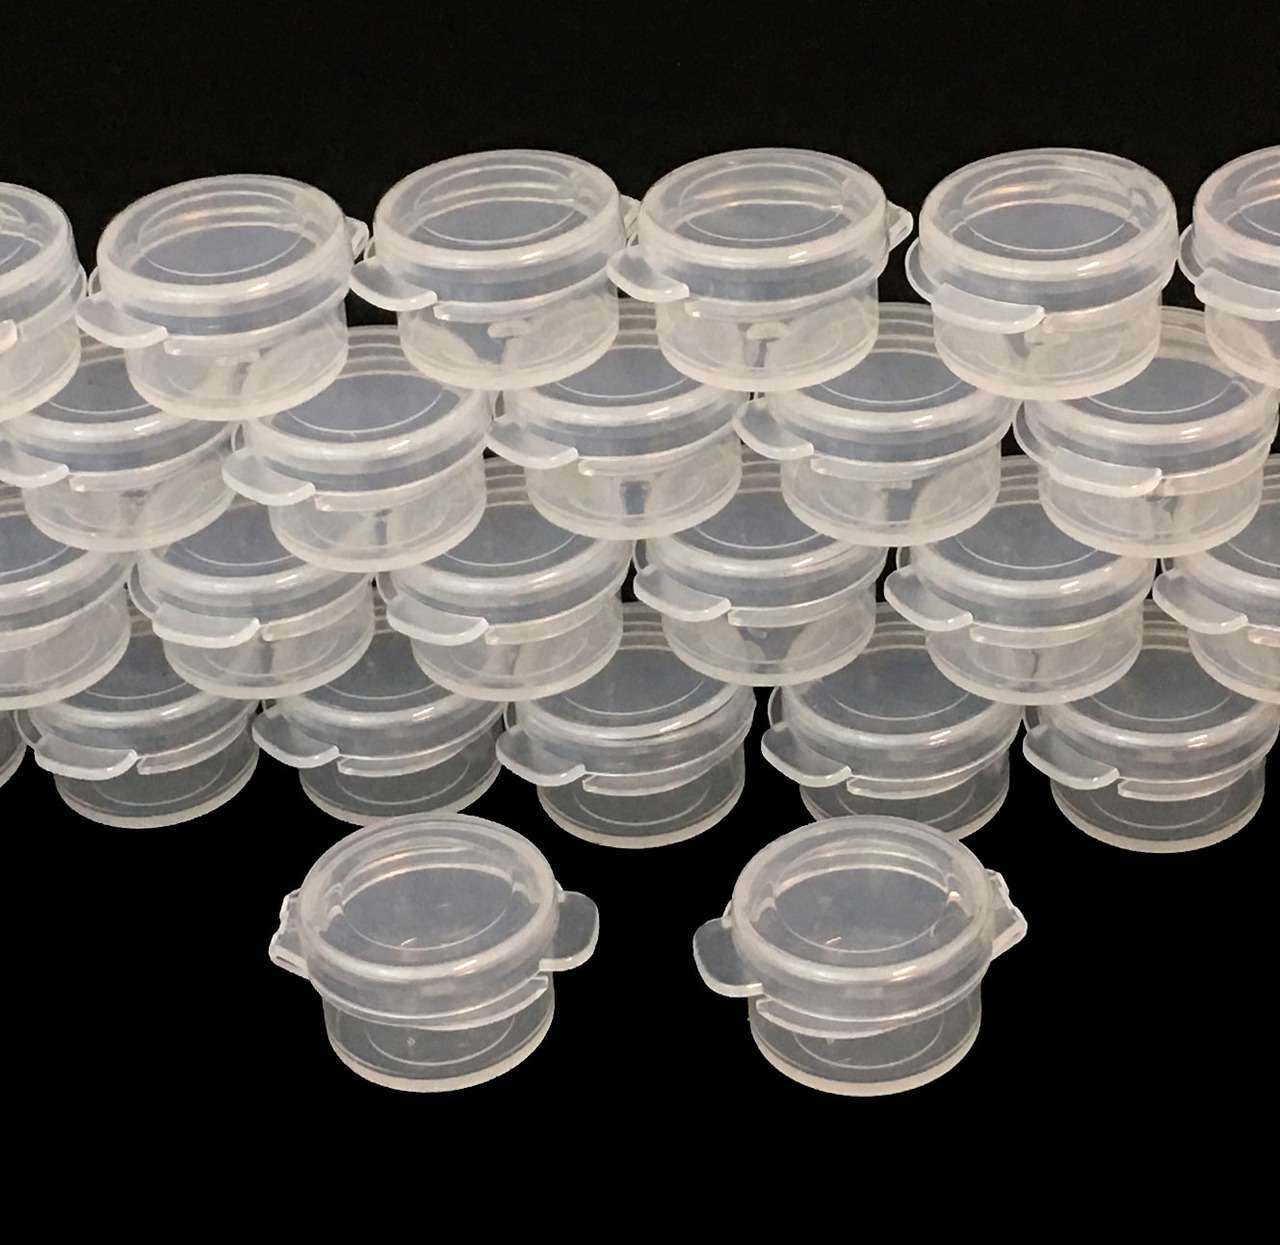 https://cdn11.bigcommerce.com/s-qd7k5gxi/images/stencil/1280x1280/products/502/7246/Cosmetic-Jars-Beauty-Containers-with-Flip-Top-Hinged-Lid-3-Ml-Clear-5006-Beauty-Makeup-Supply_5059__72810.1661391085.jpg?c=2?imbypass=on